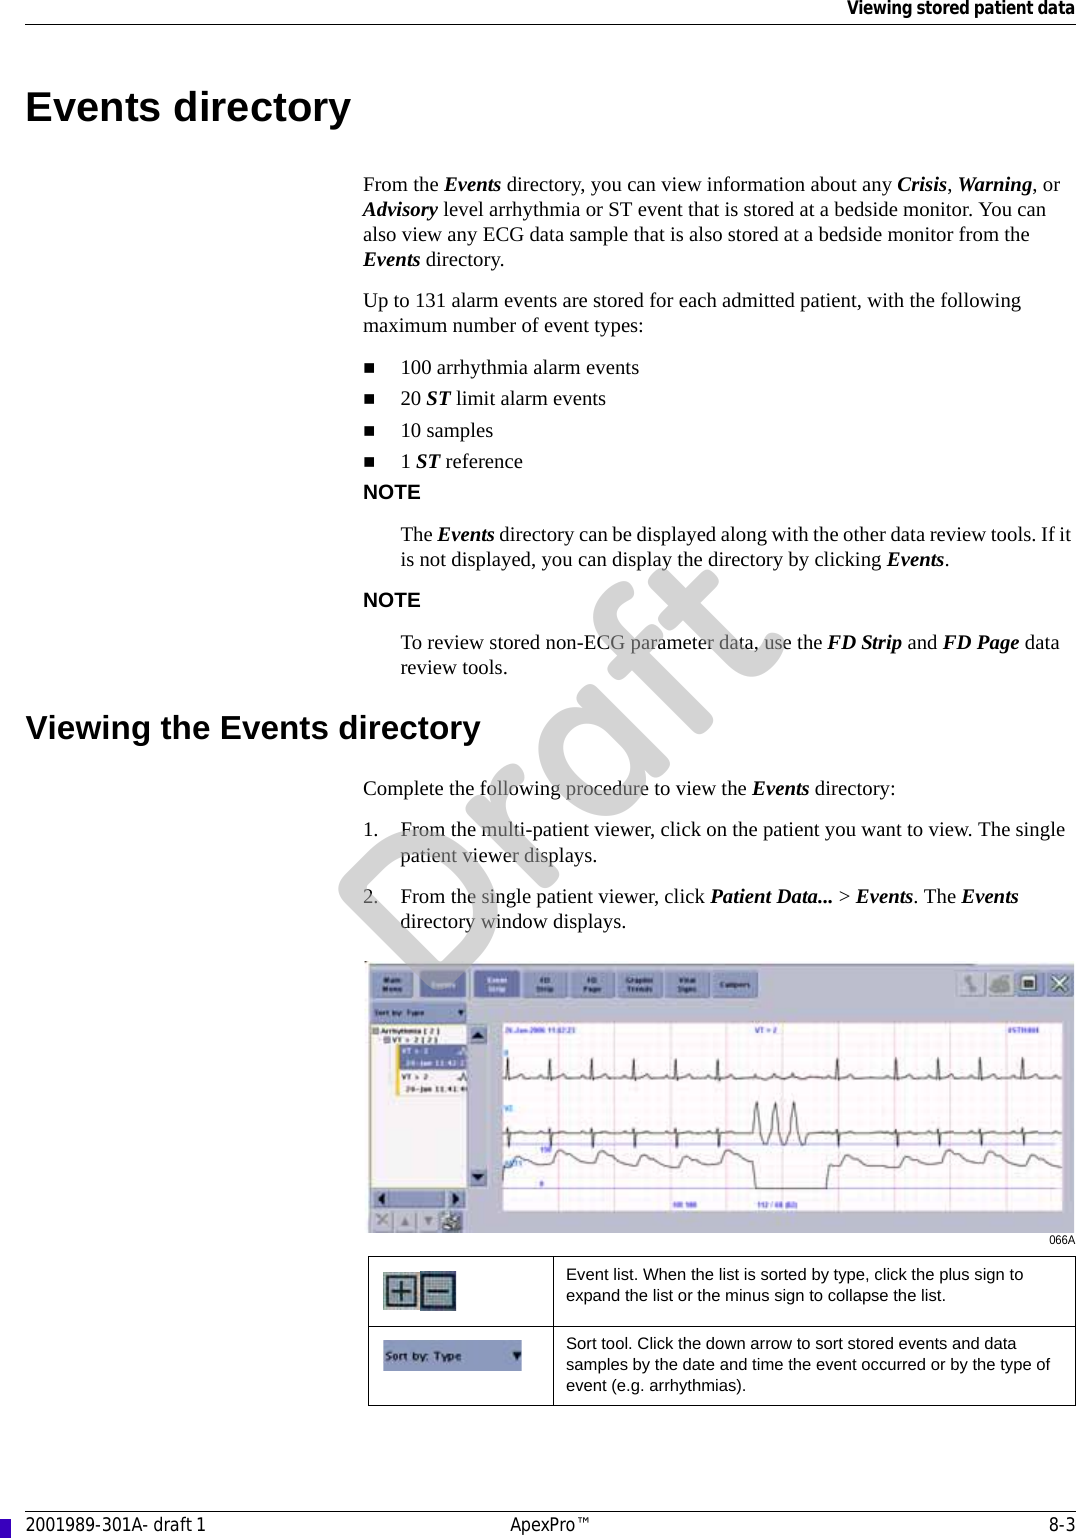 Viewing stored patient data2001989-301A- draft 1 ApexPro™ 8-3Events directoryFrom the Events directory, you can view information about any Crisis, Warning, or Advisory level arrhythmia or ST event that is stored at a bedside monitor. You can also view any ECG data sample that is also stored at a bedside monitor from the Events directory.Up to 131 alarm events are stored for each admitted patient, with the following maximum number of event types:100 arrhythmia alarm events20 ST limit alarm events10 samples1 ST referenceNOTEThe Events directory can be displayed along with the other data review tools. If it is not displayed, you can display the directory by clicking Events.NOTETo review stored non-ECG parameter data, use the FD Strip and FD Page data review tools.Viewing the Events directoryComplete the following procedure to view the Events directory:1. From the multi-patient viewer, click on the patient you want to view. The single patient viewer displays.2. From the single patient viewer, click Patient Data... &gt; Events. The Events directory window displays.066AEvent list. When the list is sorted by type, click the plus sign to expand the list or the minus sign to collapse the list.Sort tool. Click the down arrow to sort stored events and data samples by the date and time the event occurred or by the type of event (e.g. arrhythmias).Draft